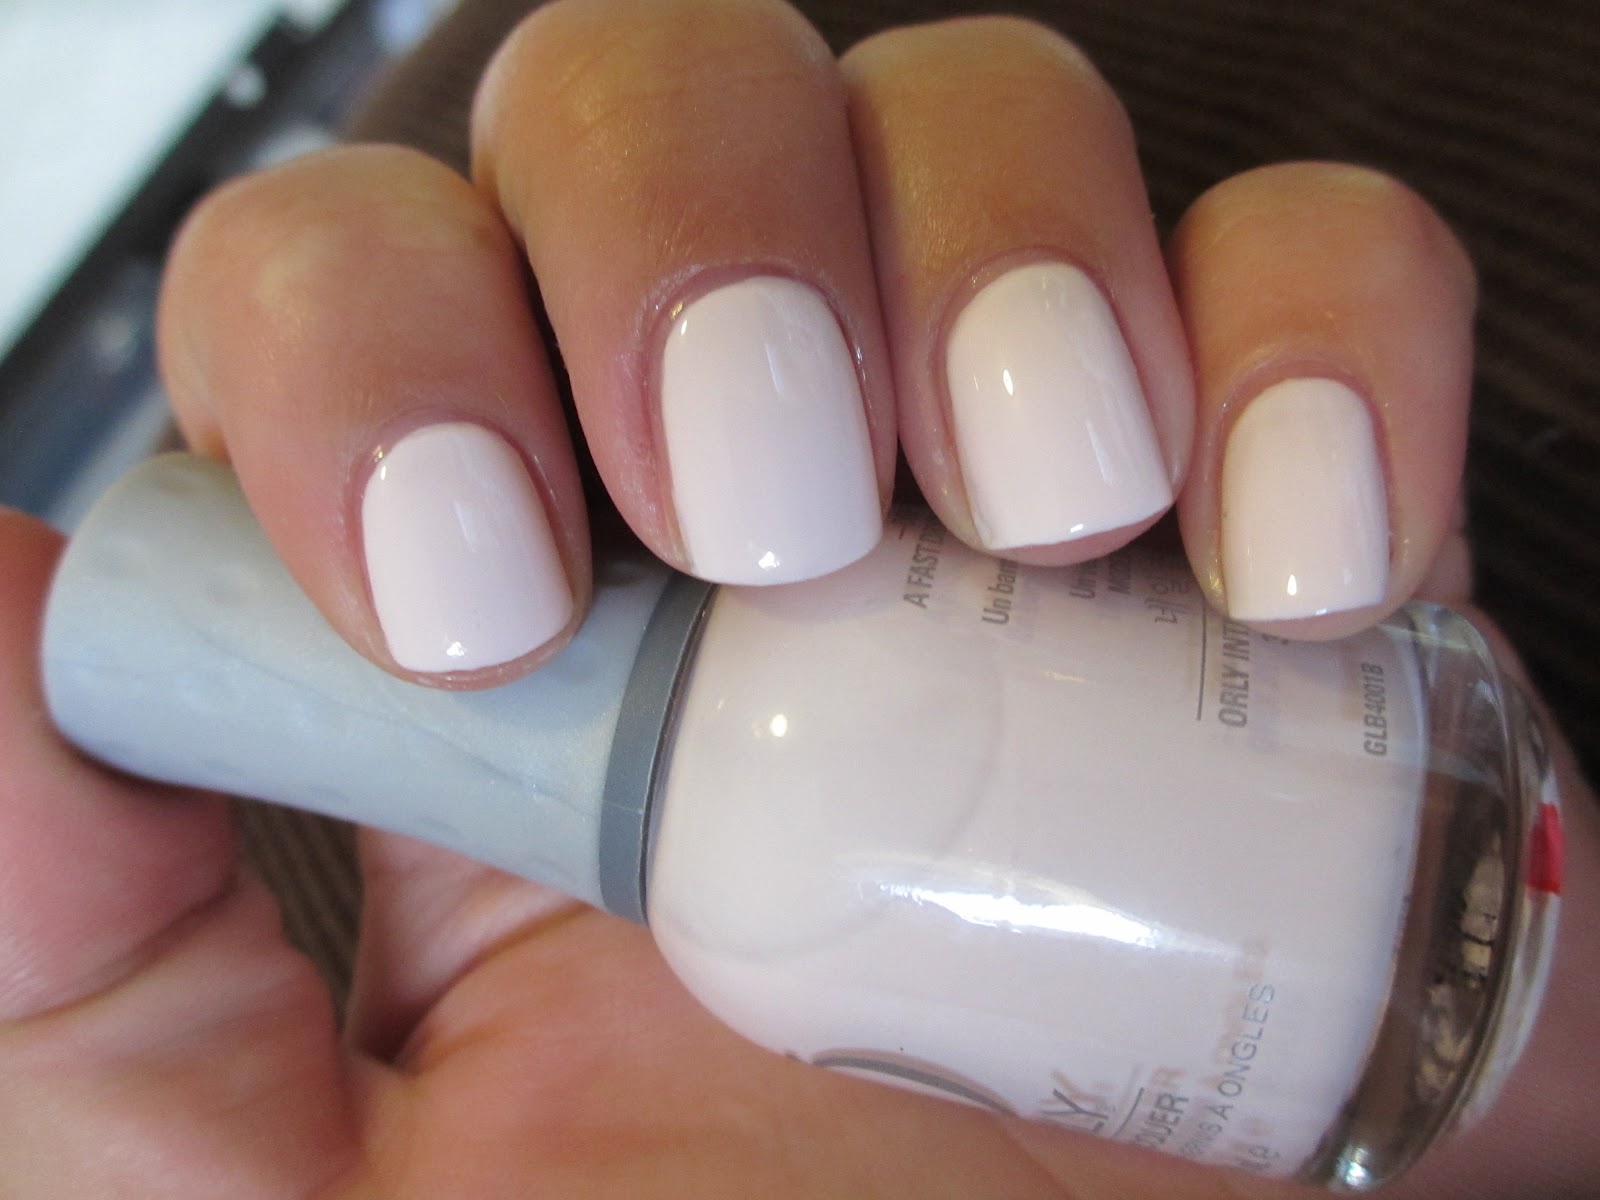 Orly Nail Lacquer in Kiss the Bride - wide 2